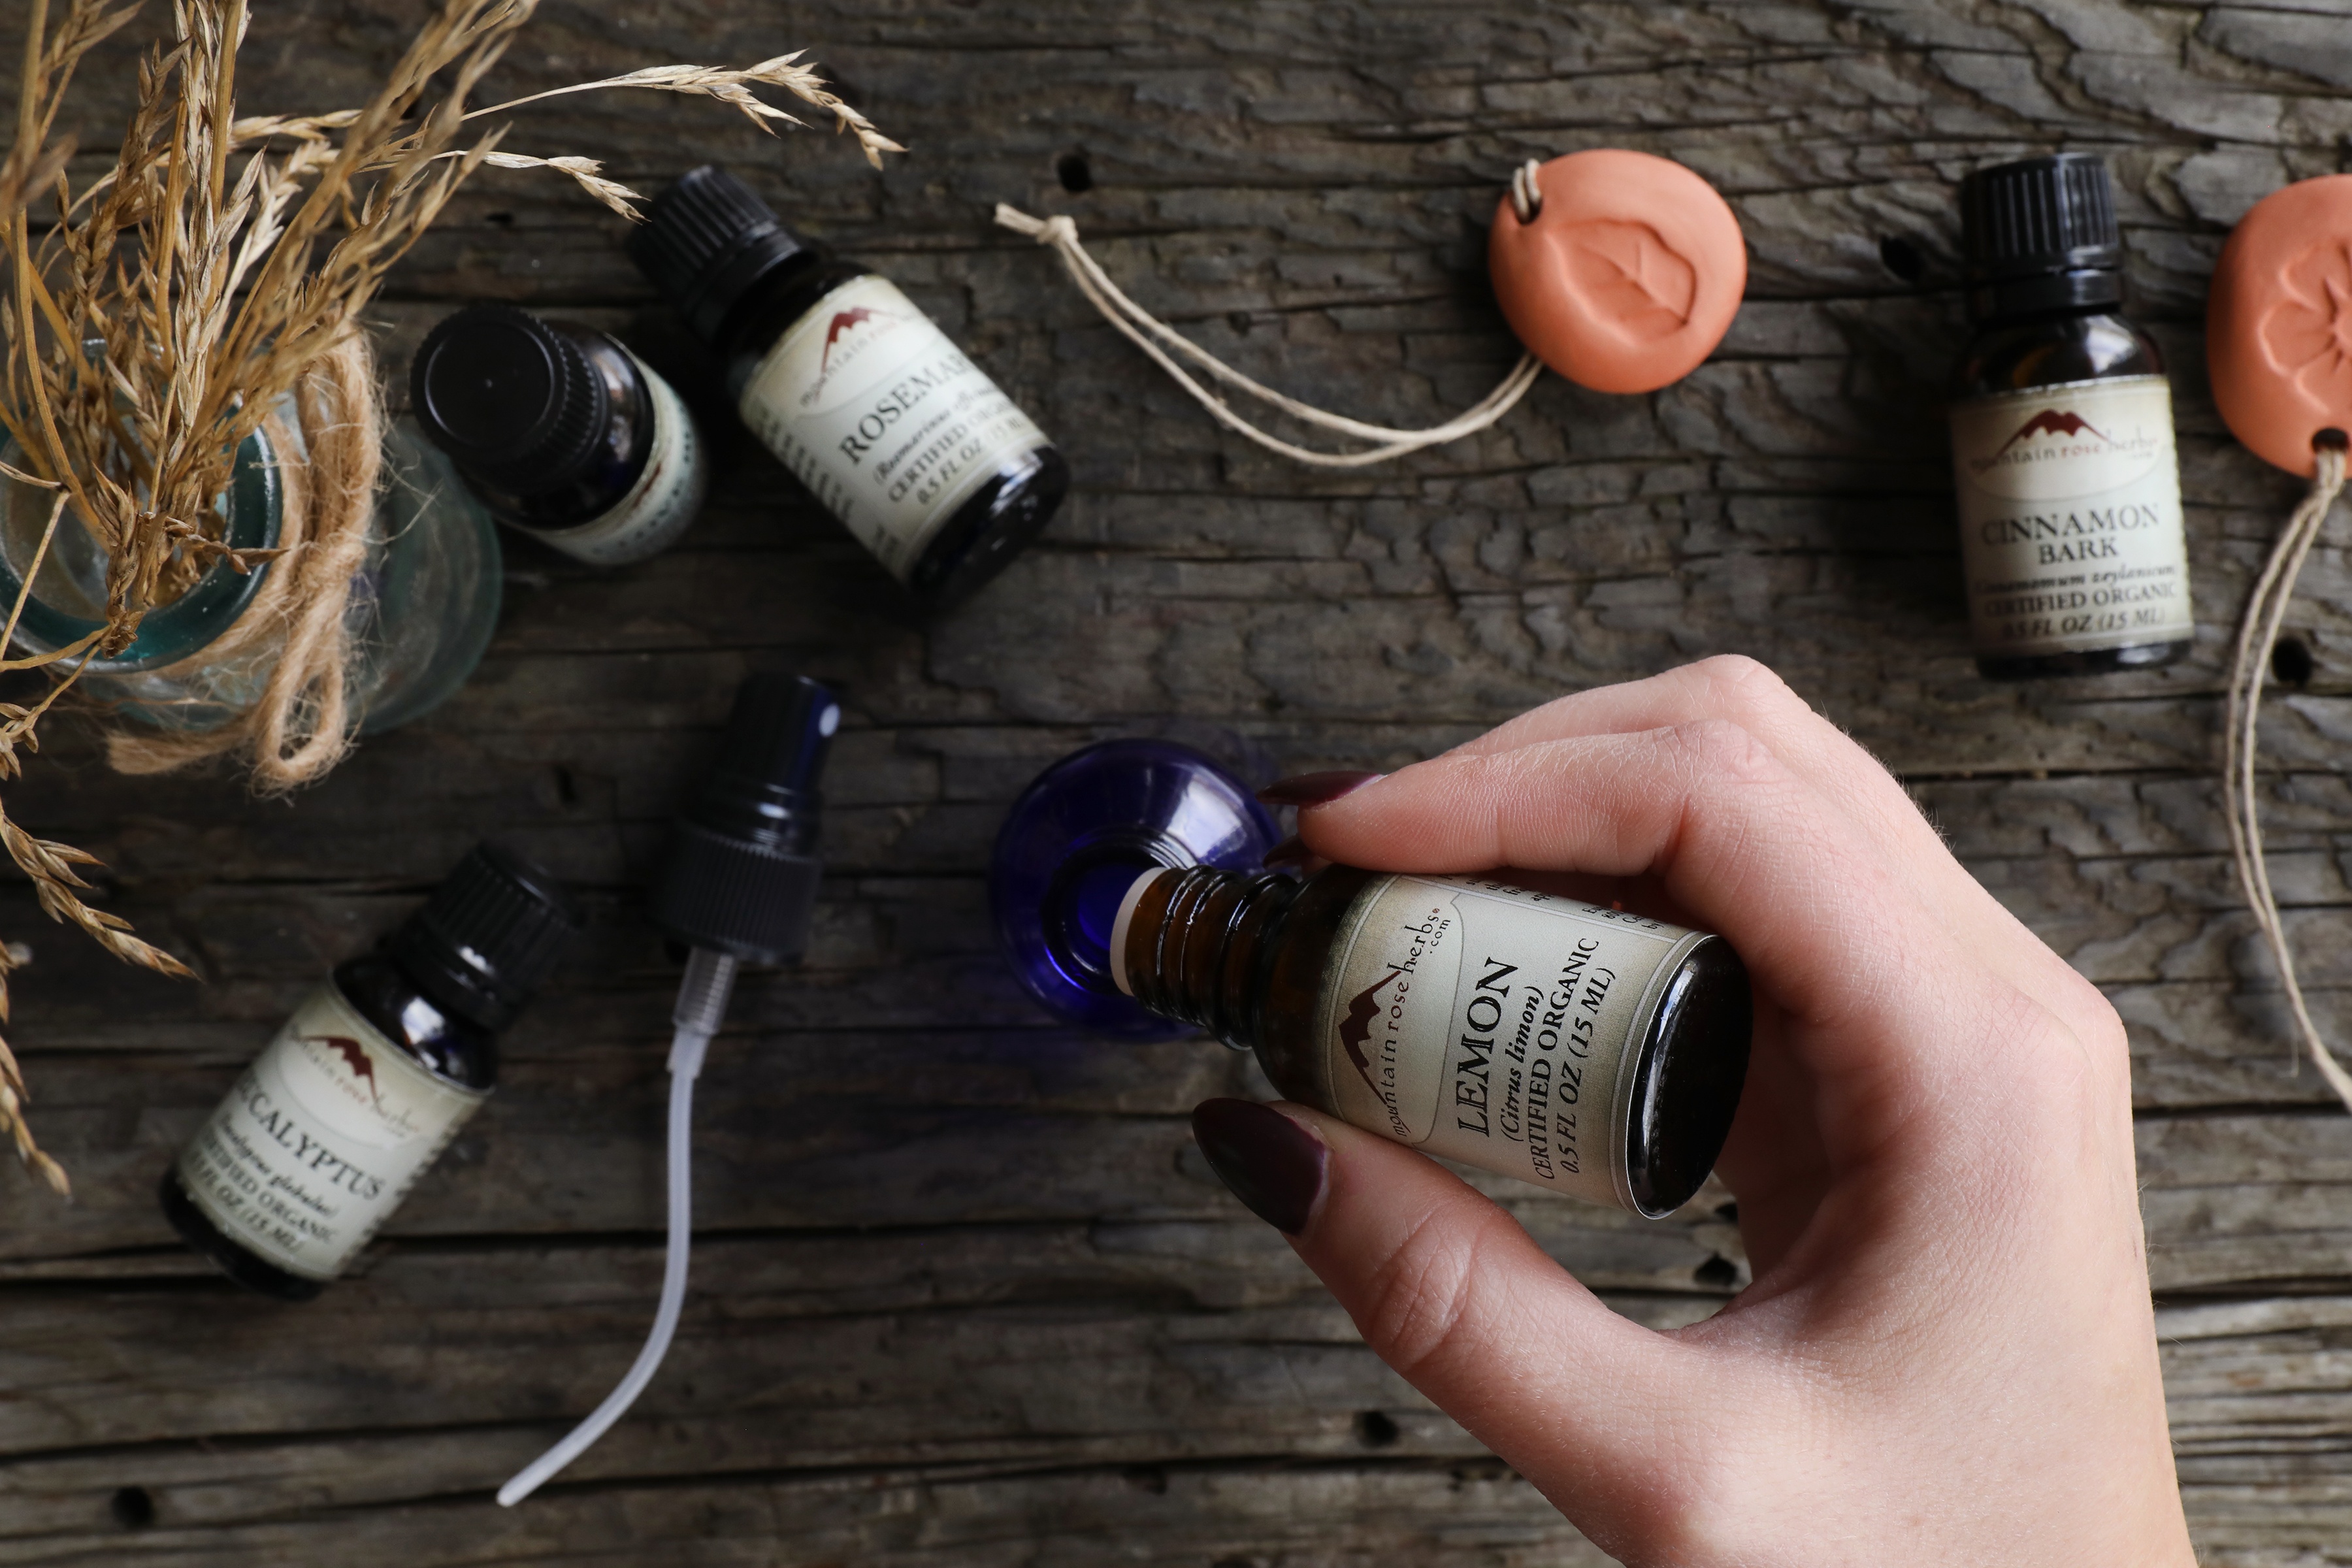 Thieves Essential Oil Blend: 12 Ways to Use Thieves for a Naturally He